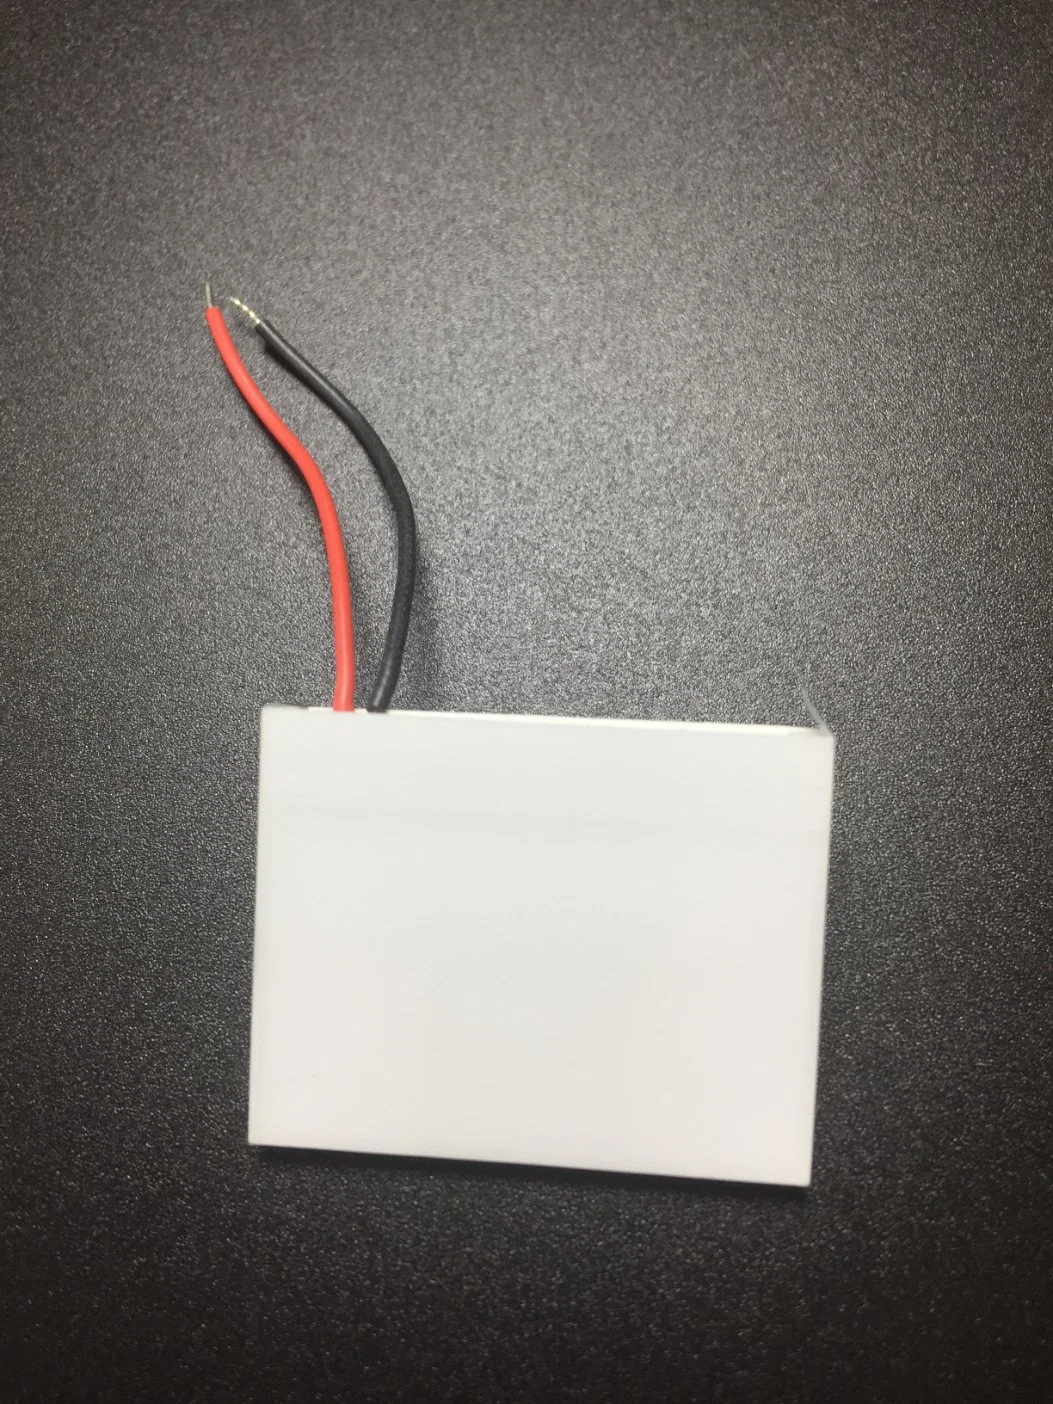 Wires, Pins Connector White LED Back Light for LCD Display